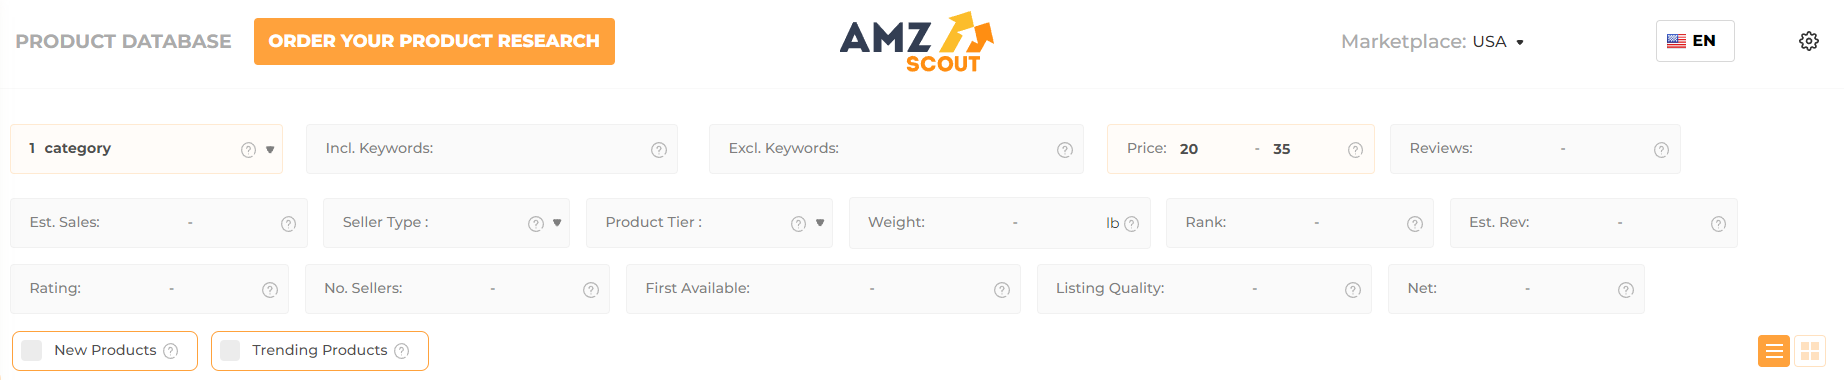 AMZScout Product Database